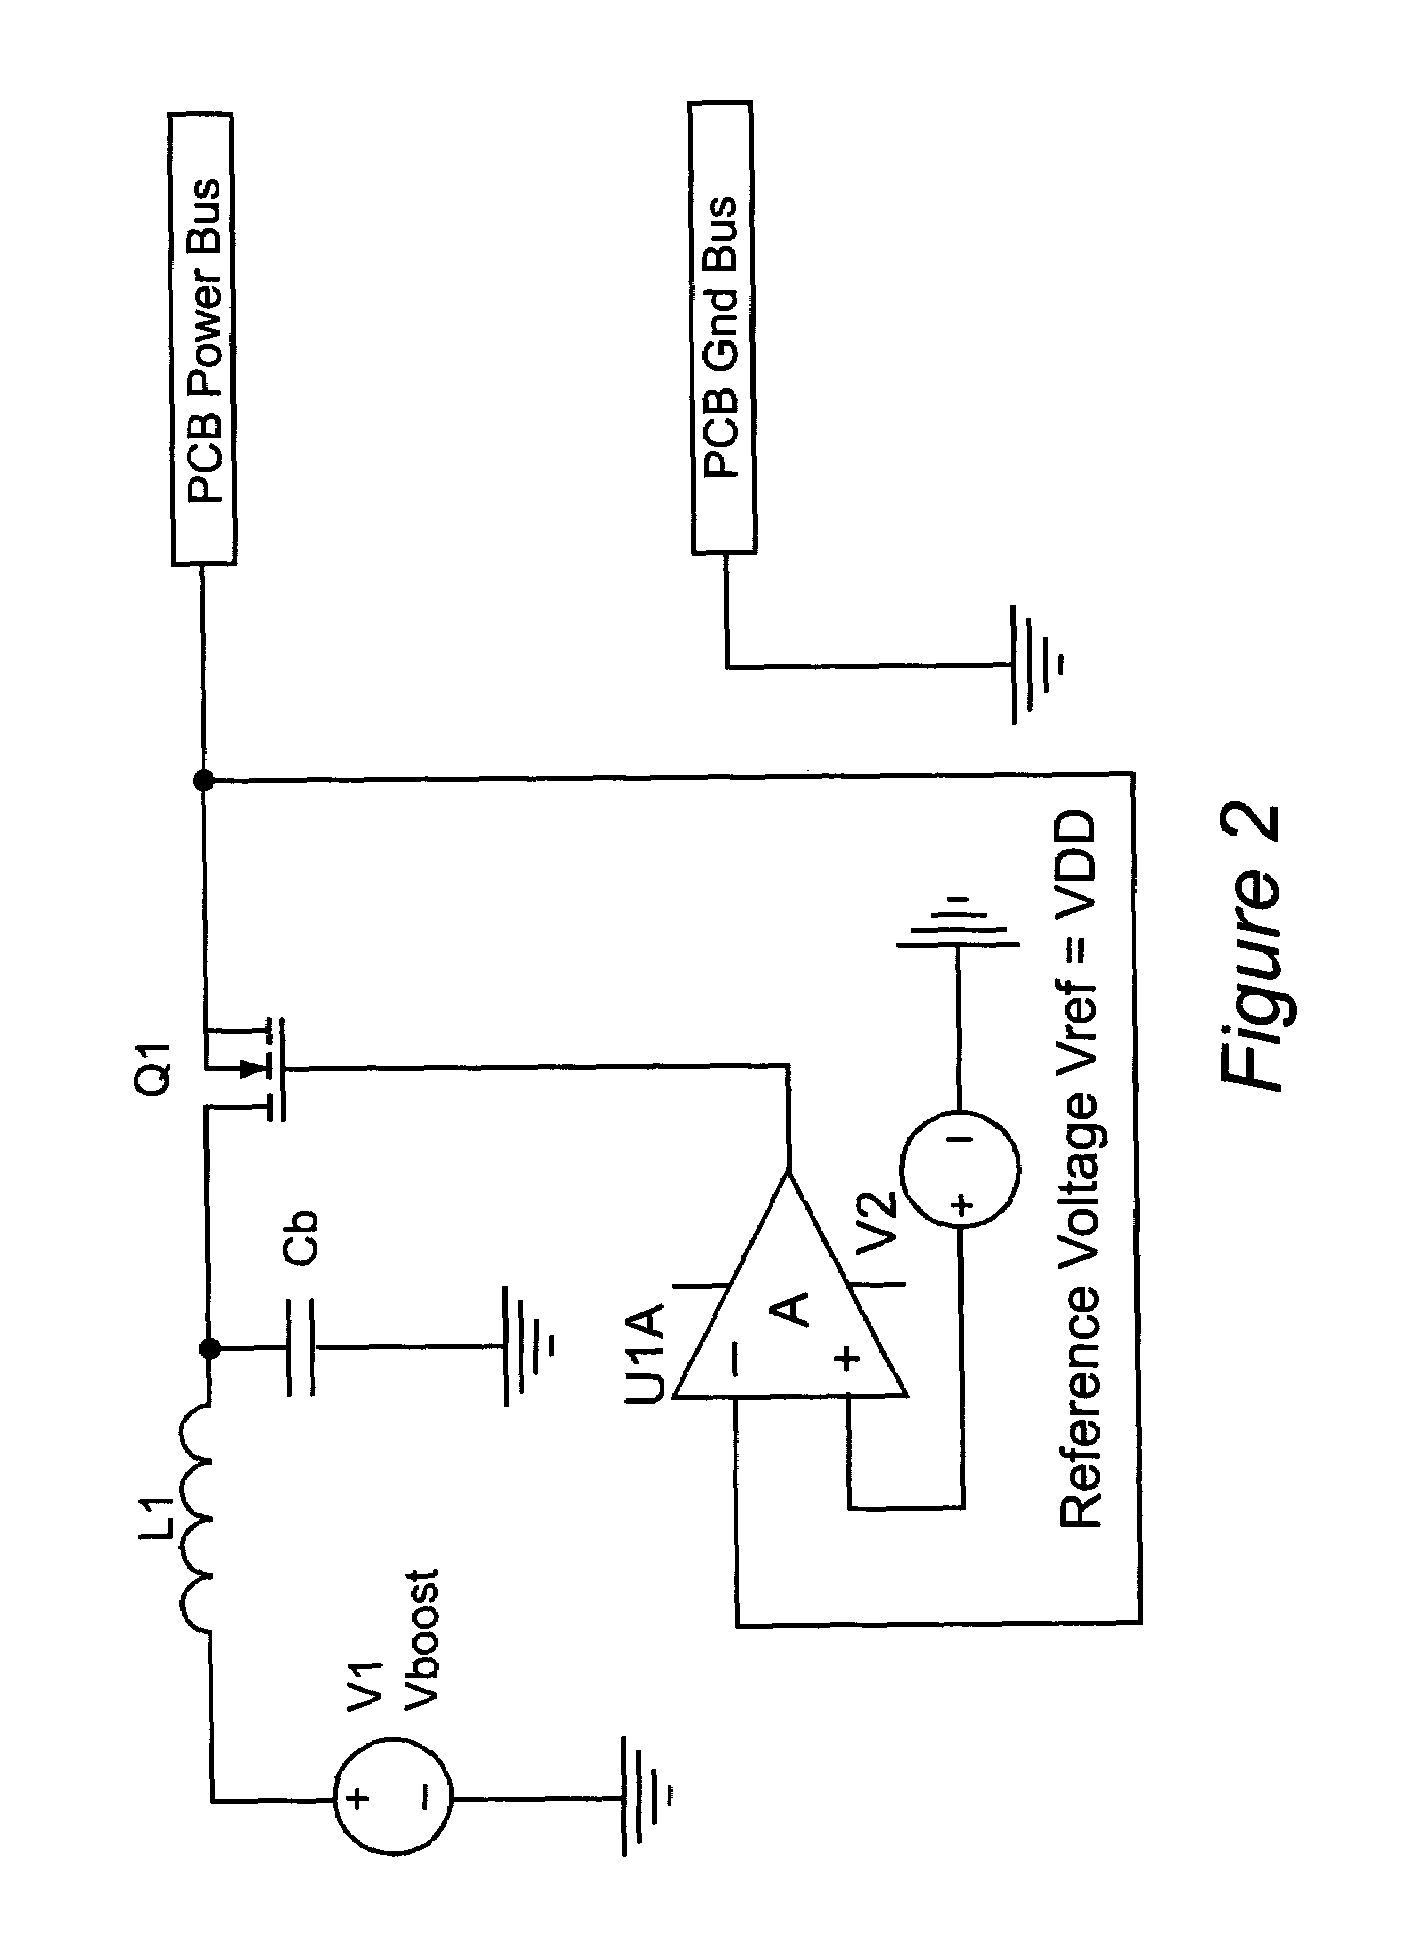 Device for probe card power bus noise reduction